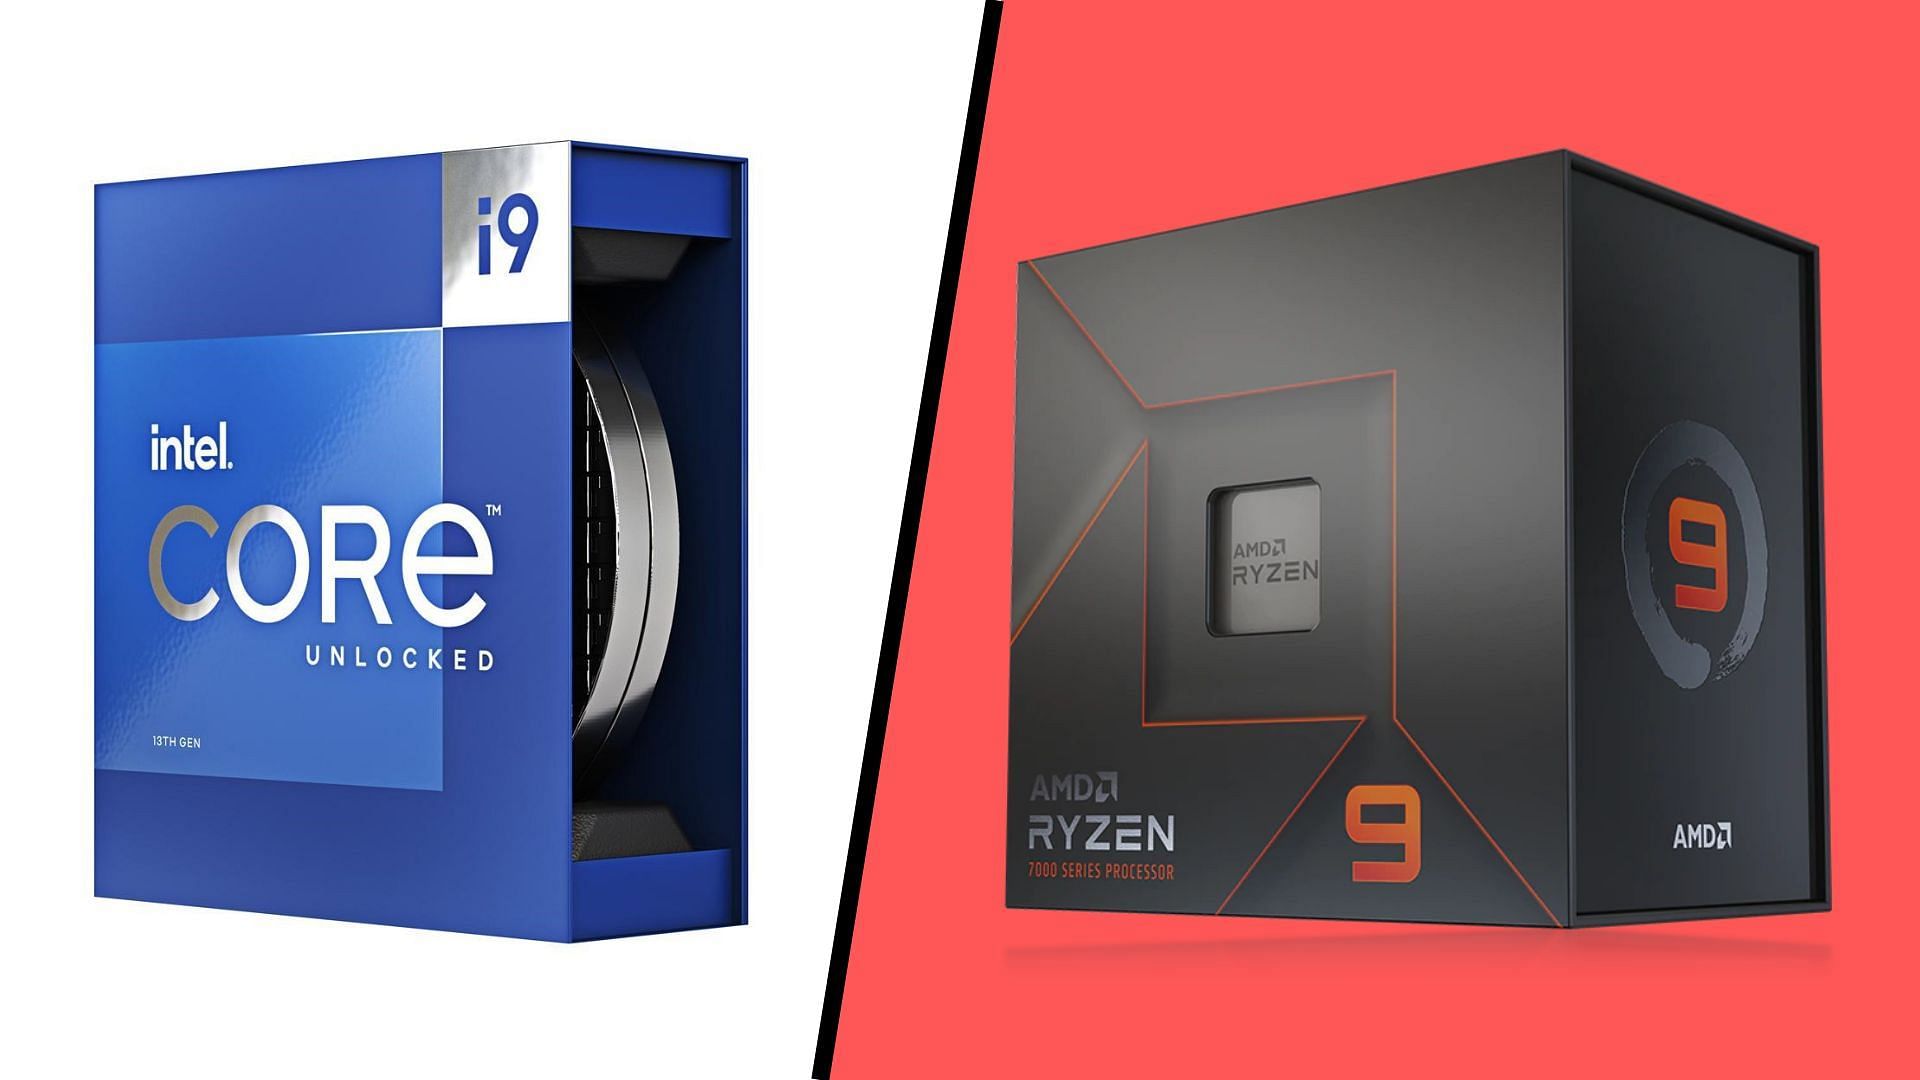 Intel Core i9 13900K and Ryzen 9 7900X retail boxes (Image via Intel and AMD)